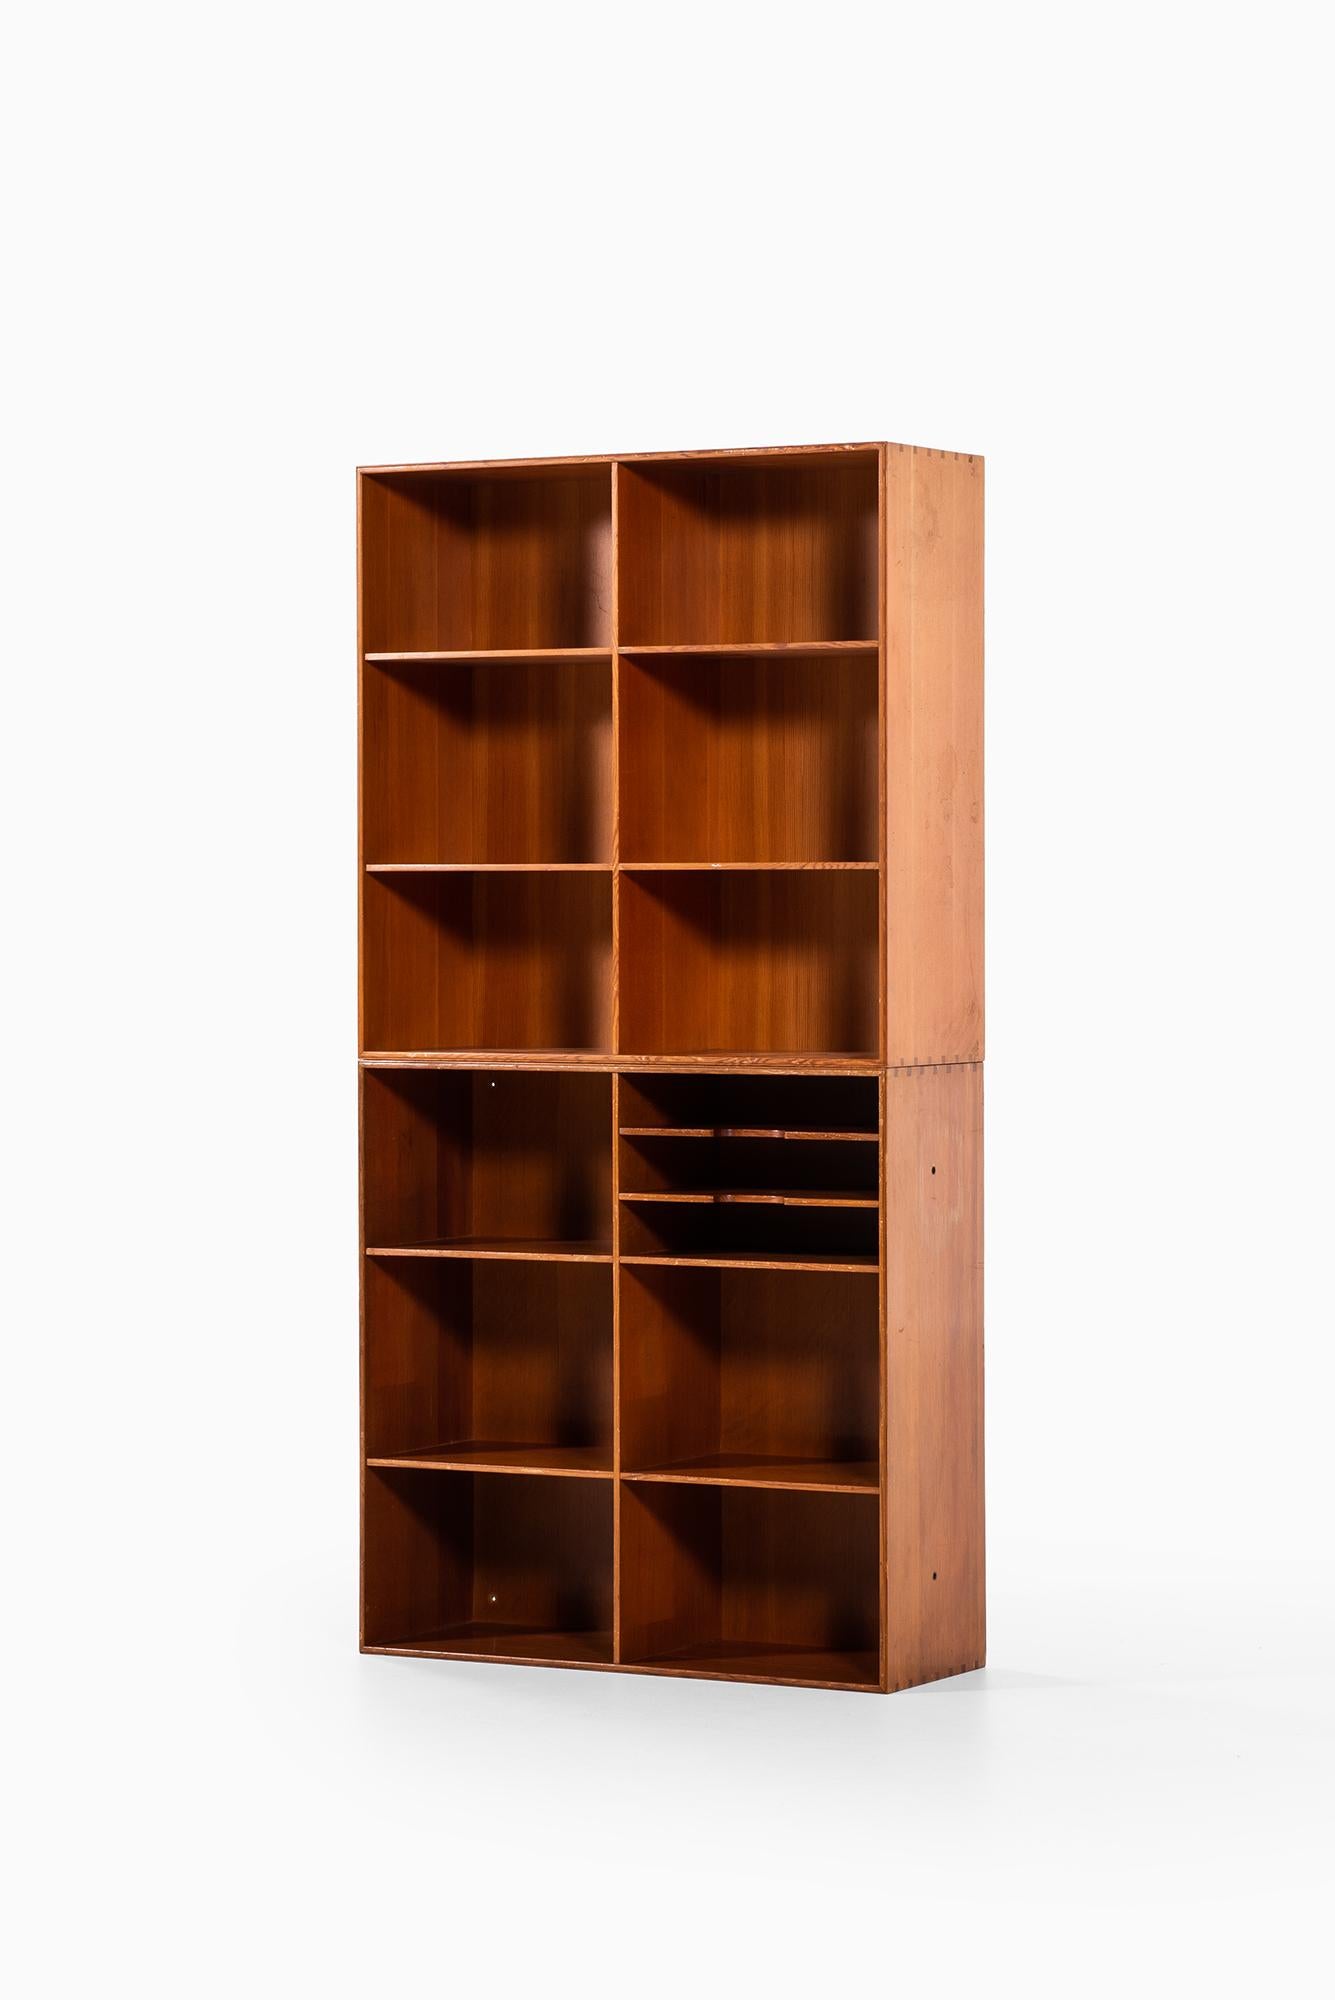 Pair of bookcases designed by Mogens Koch. Produced by Rud Rasmussen in Denmark.